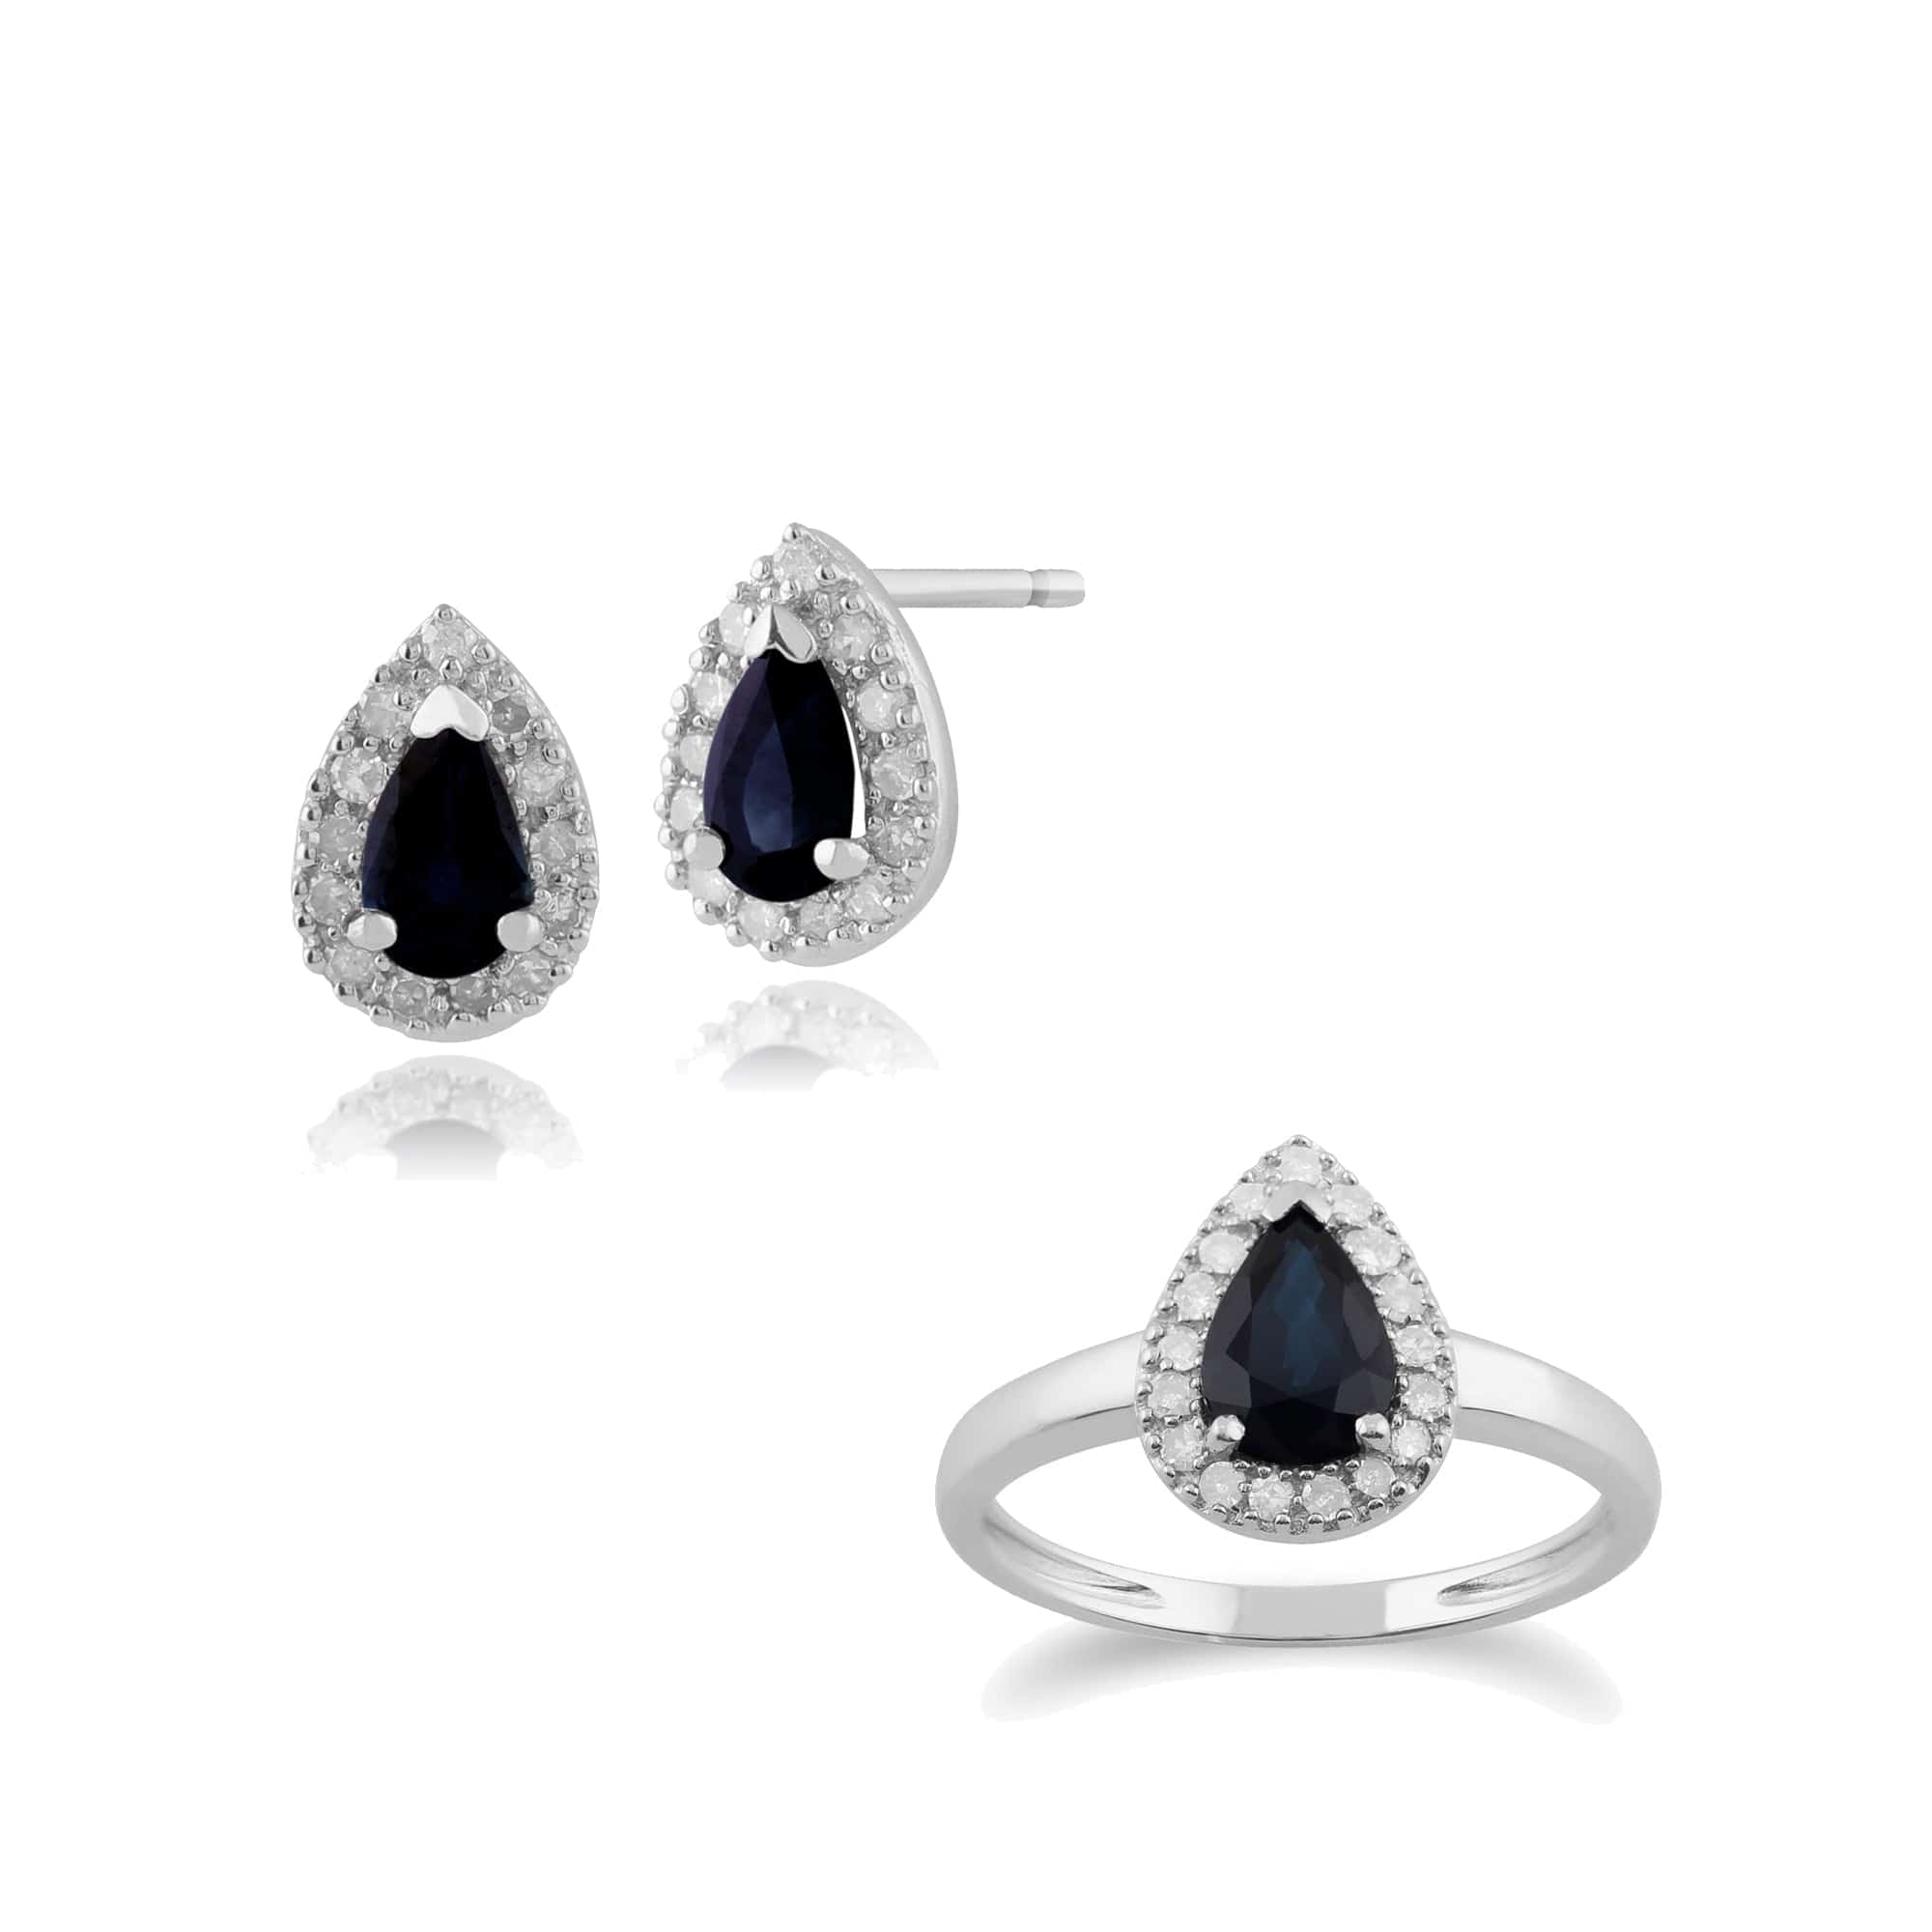 123E0693019-117R0164039 Classic Pear Sapphire & Diamond Halo Stud Earrings & Ring Set in 9ct White Gold 1